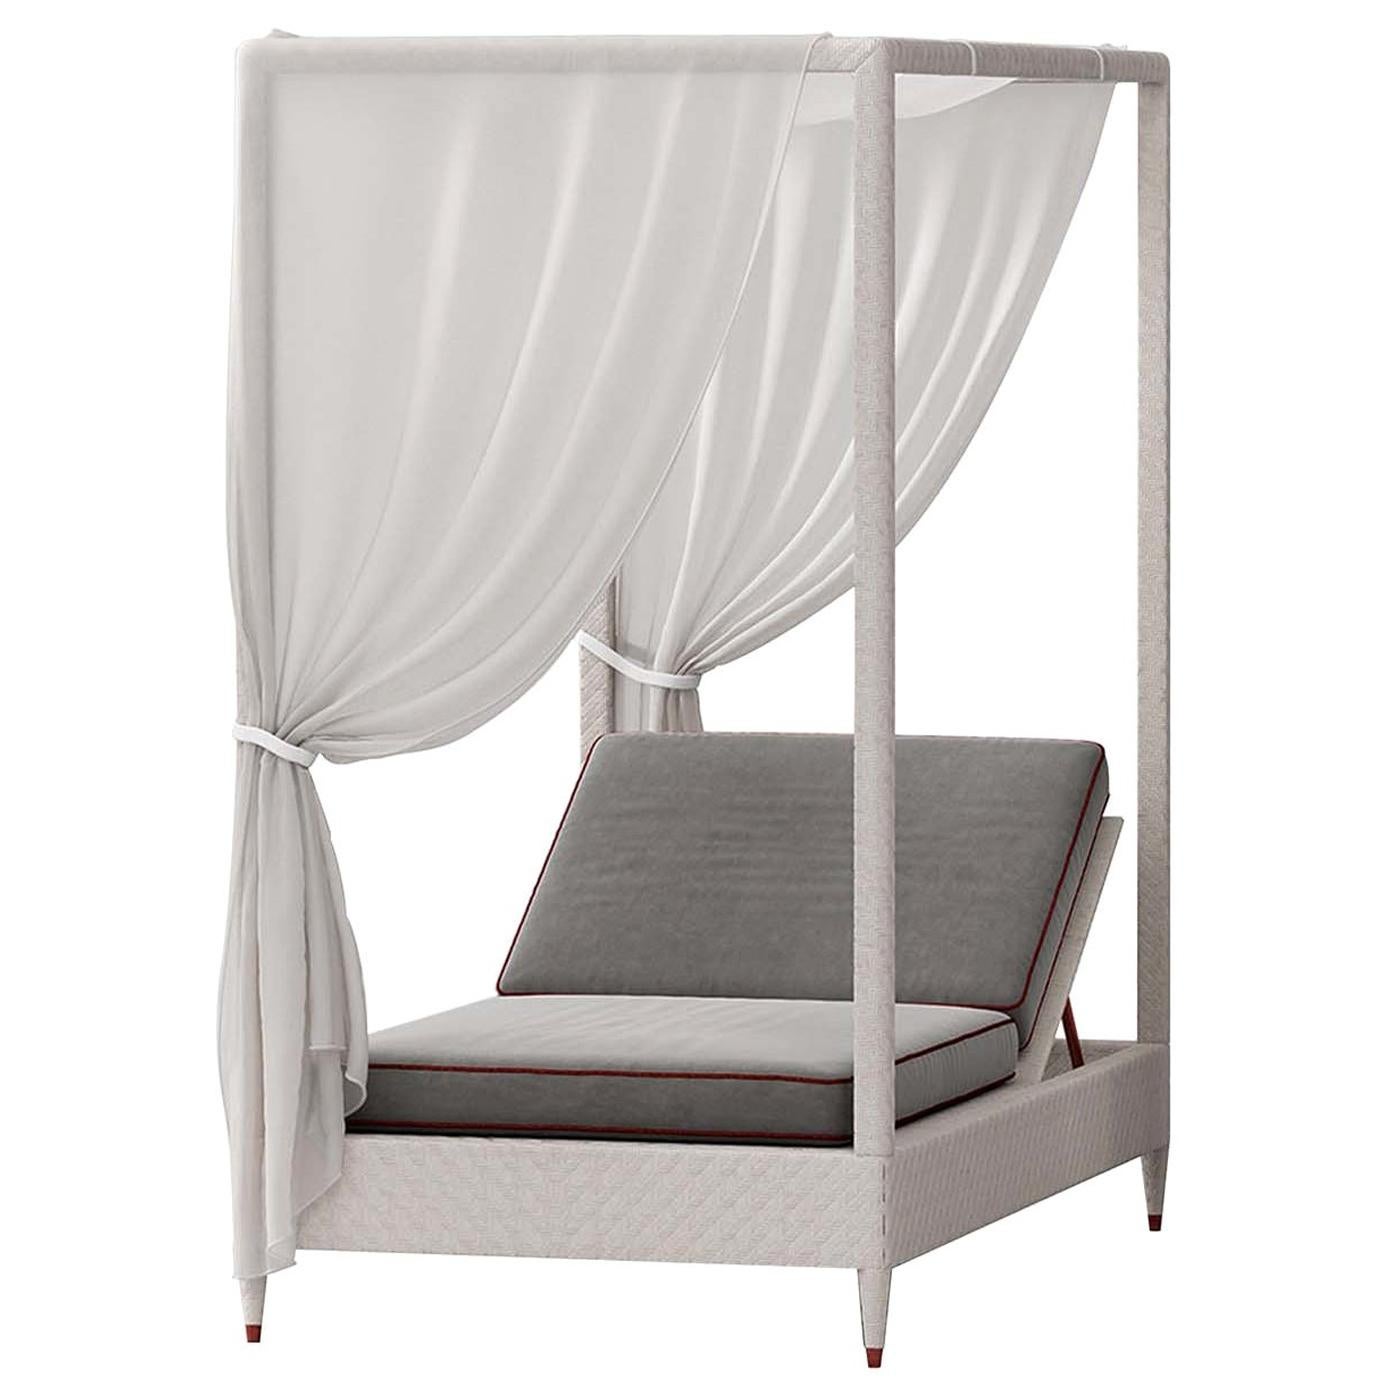 White 1-Seat Daybed with Canopy For Sale